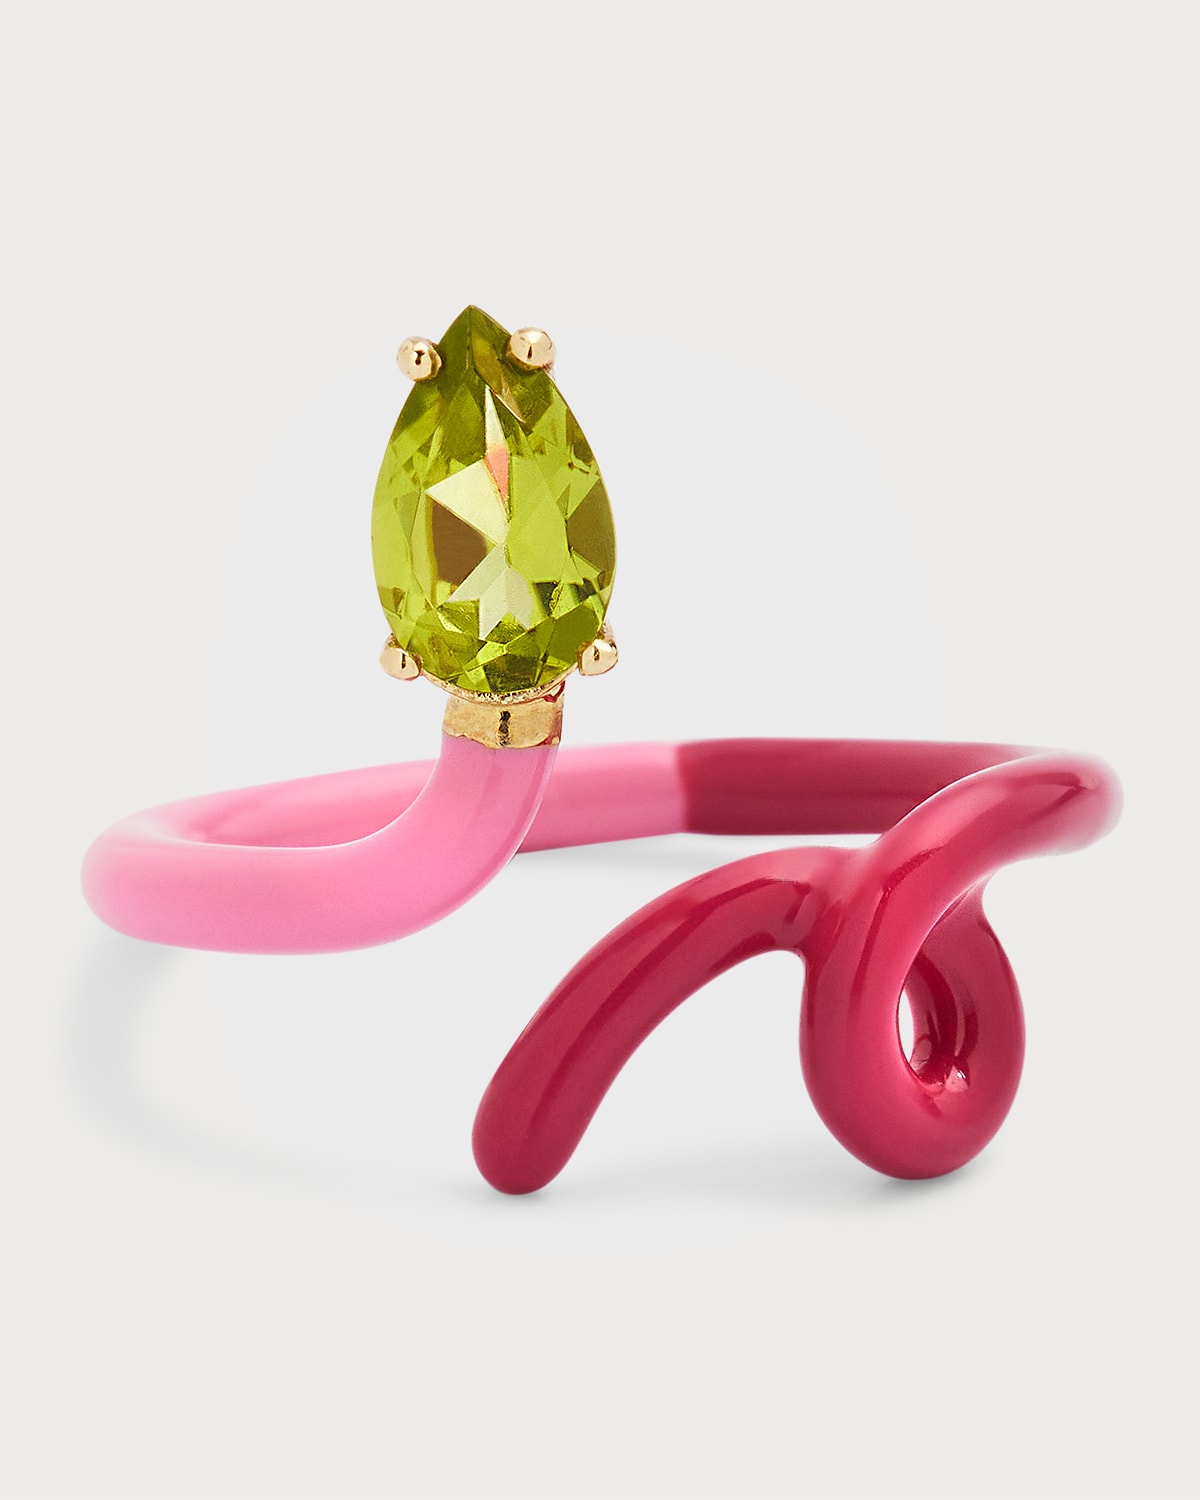 B Vine Ring in Bubblegum Pink and Amarena Enamel with Peridot Drop